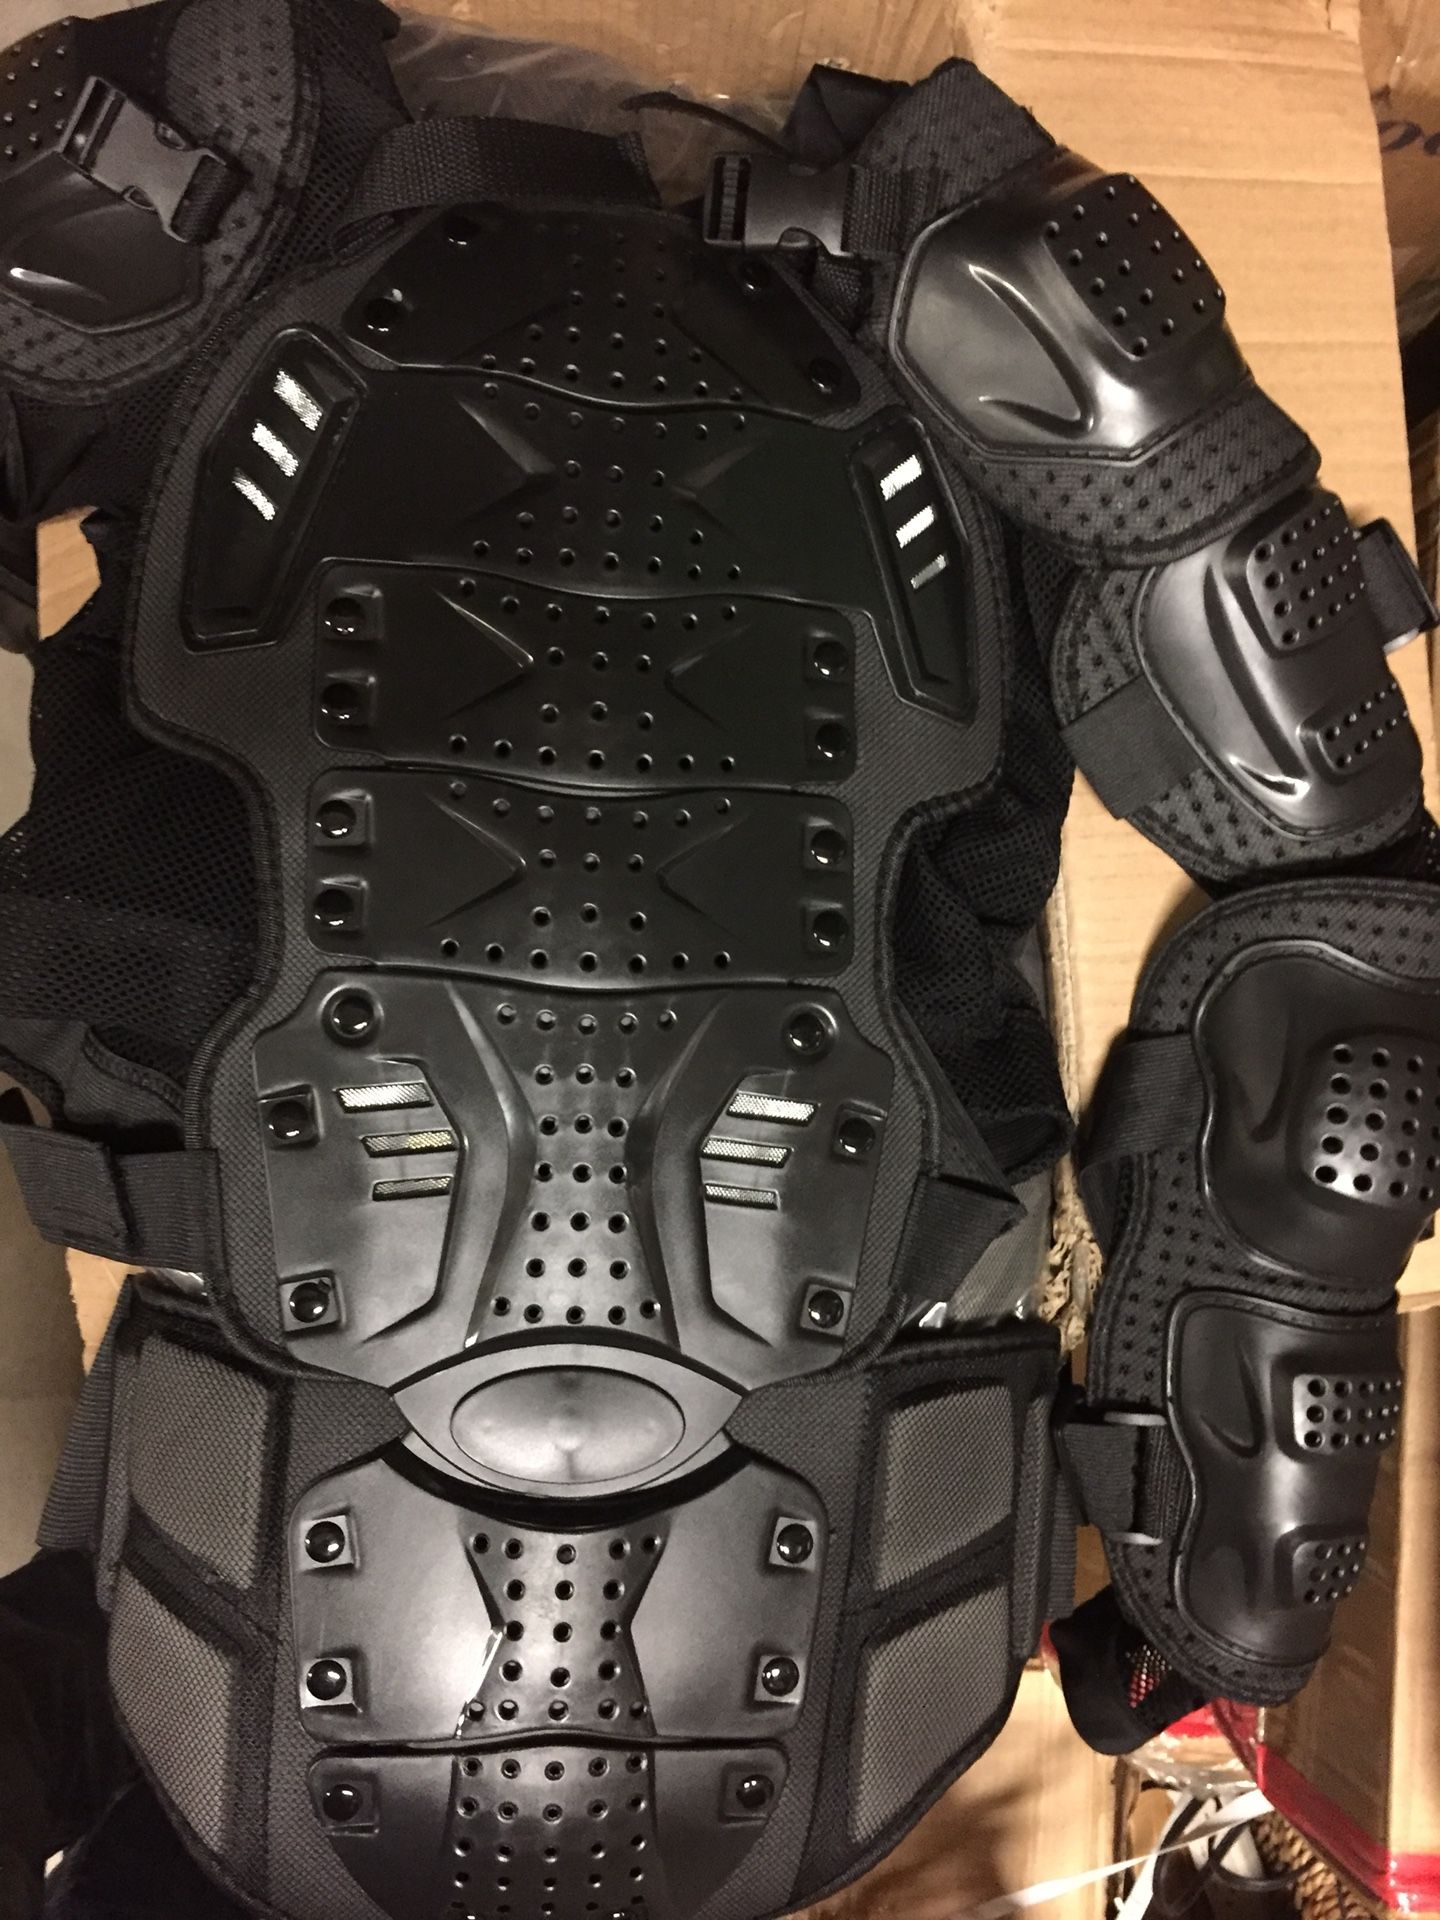 Motorcycle protection gear for street riding